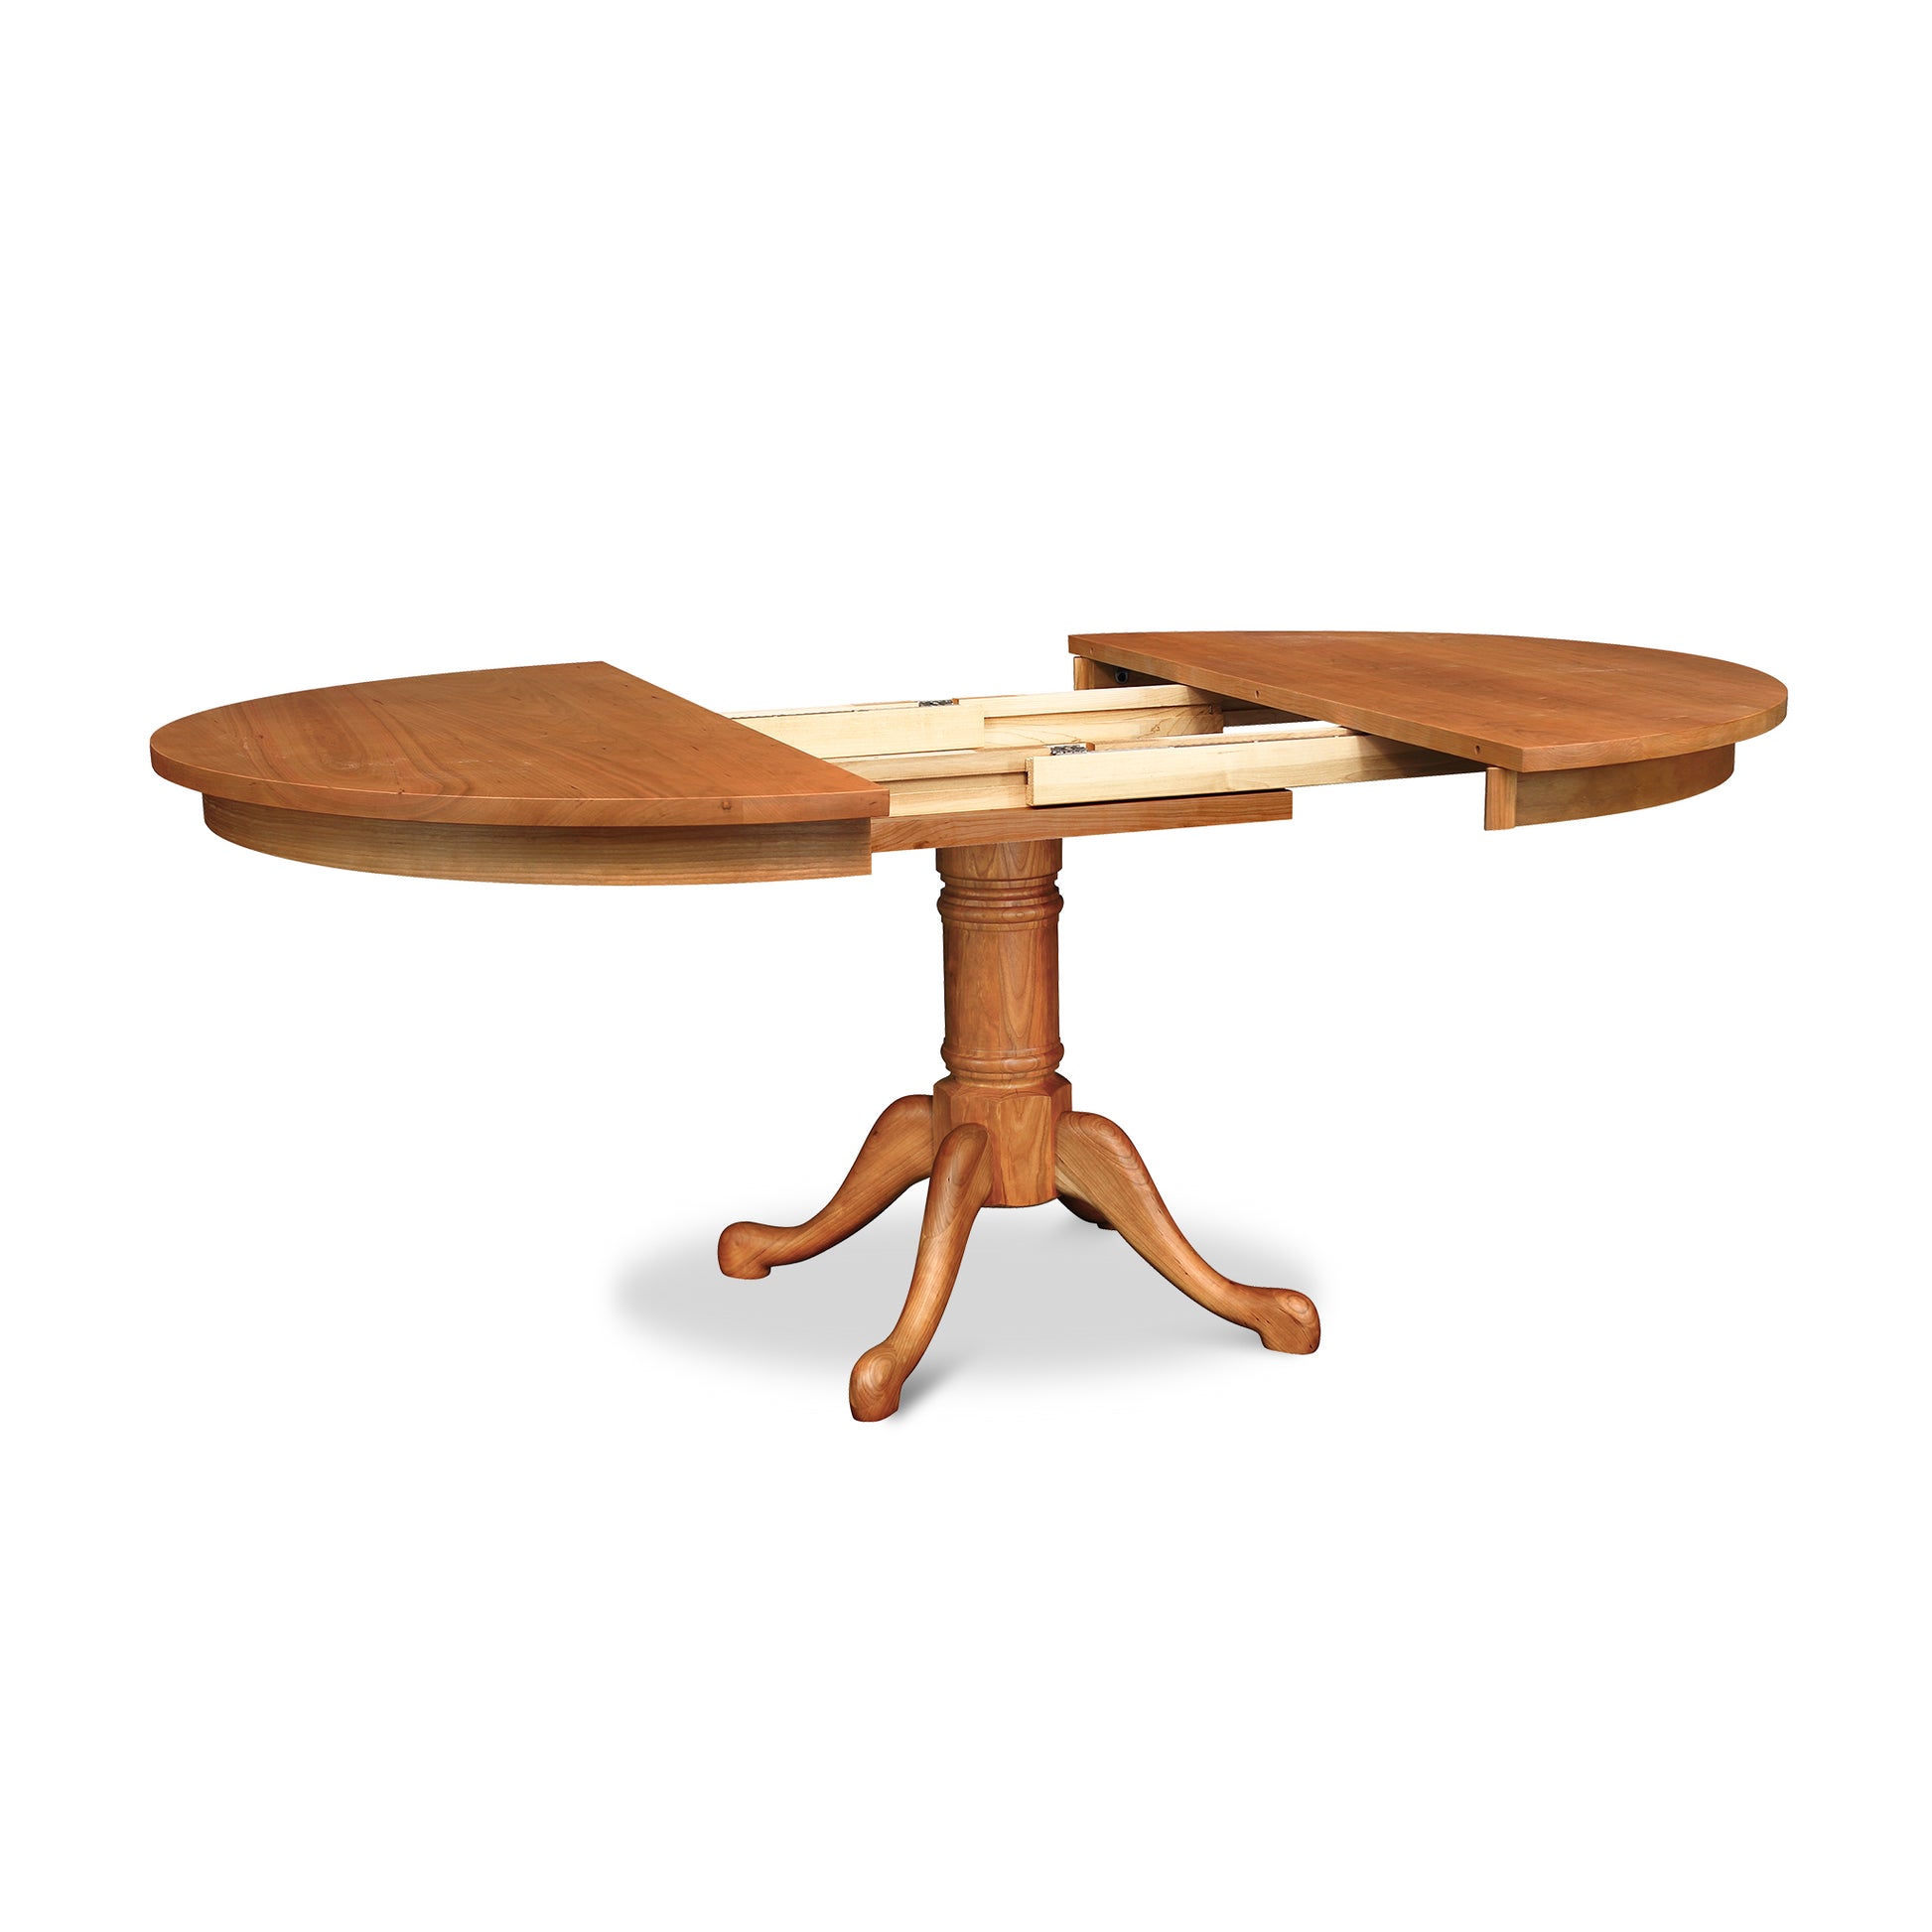 A traditional Cabriole Single Pedestal Round Extension Table with a wooden base made of North American hardwood, by Lyndon Furniture.